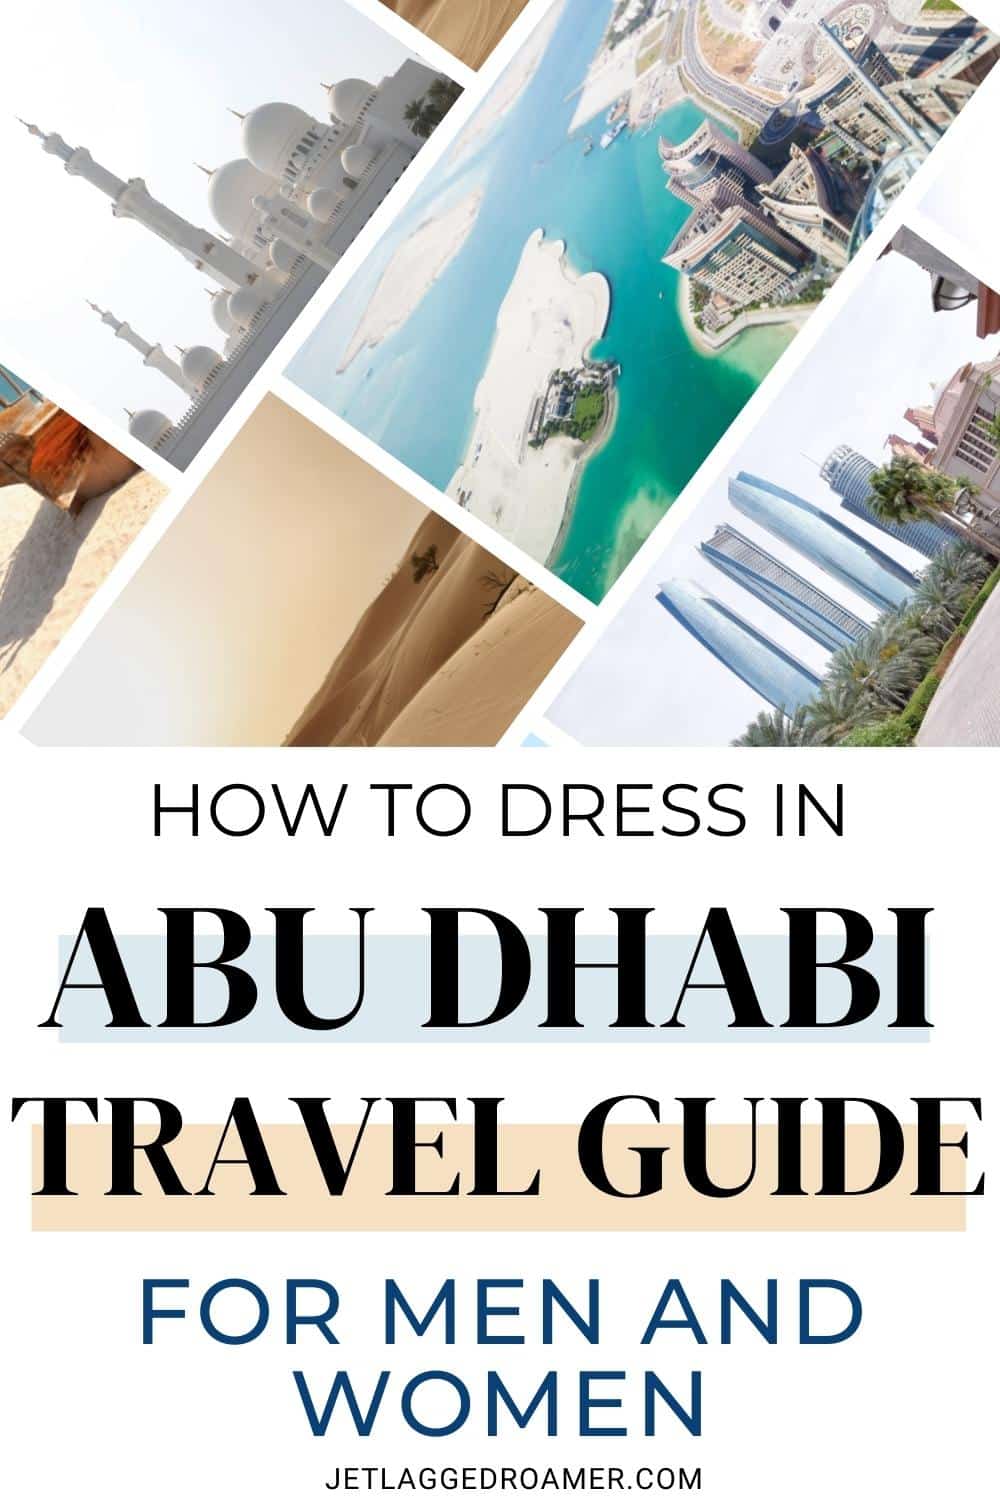 Pinterest pin for dress code in Abu Dhabi. Text says how to dress in Abu Dhabi travel guide for men and women. 